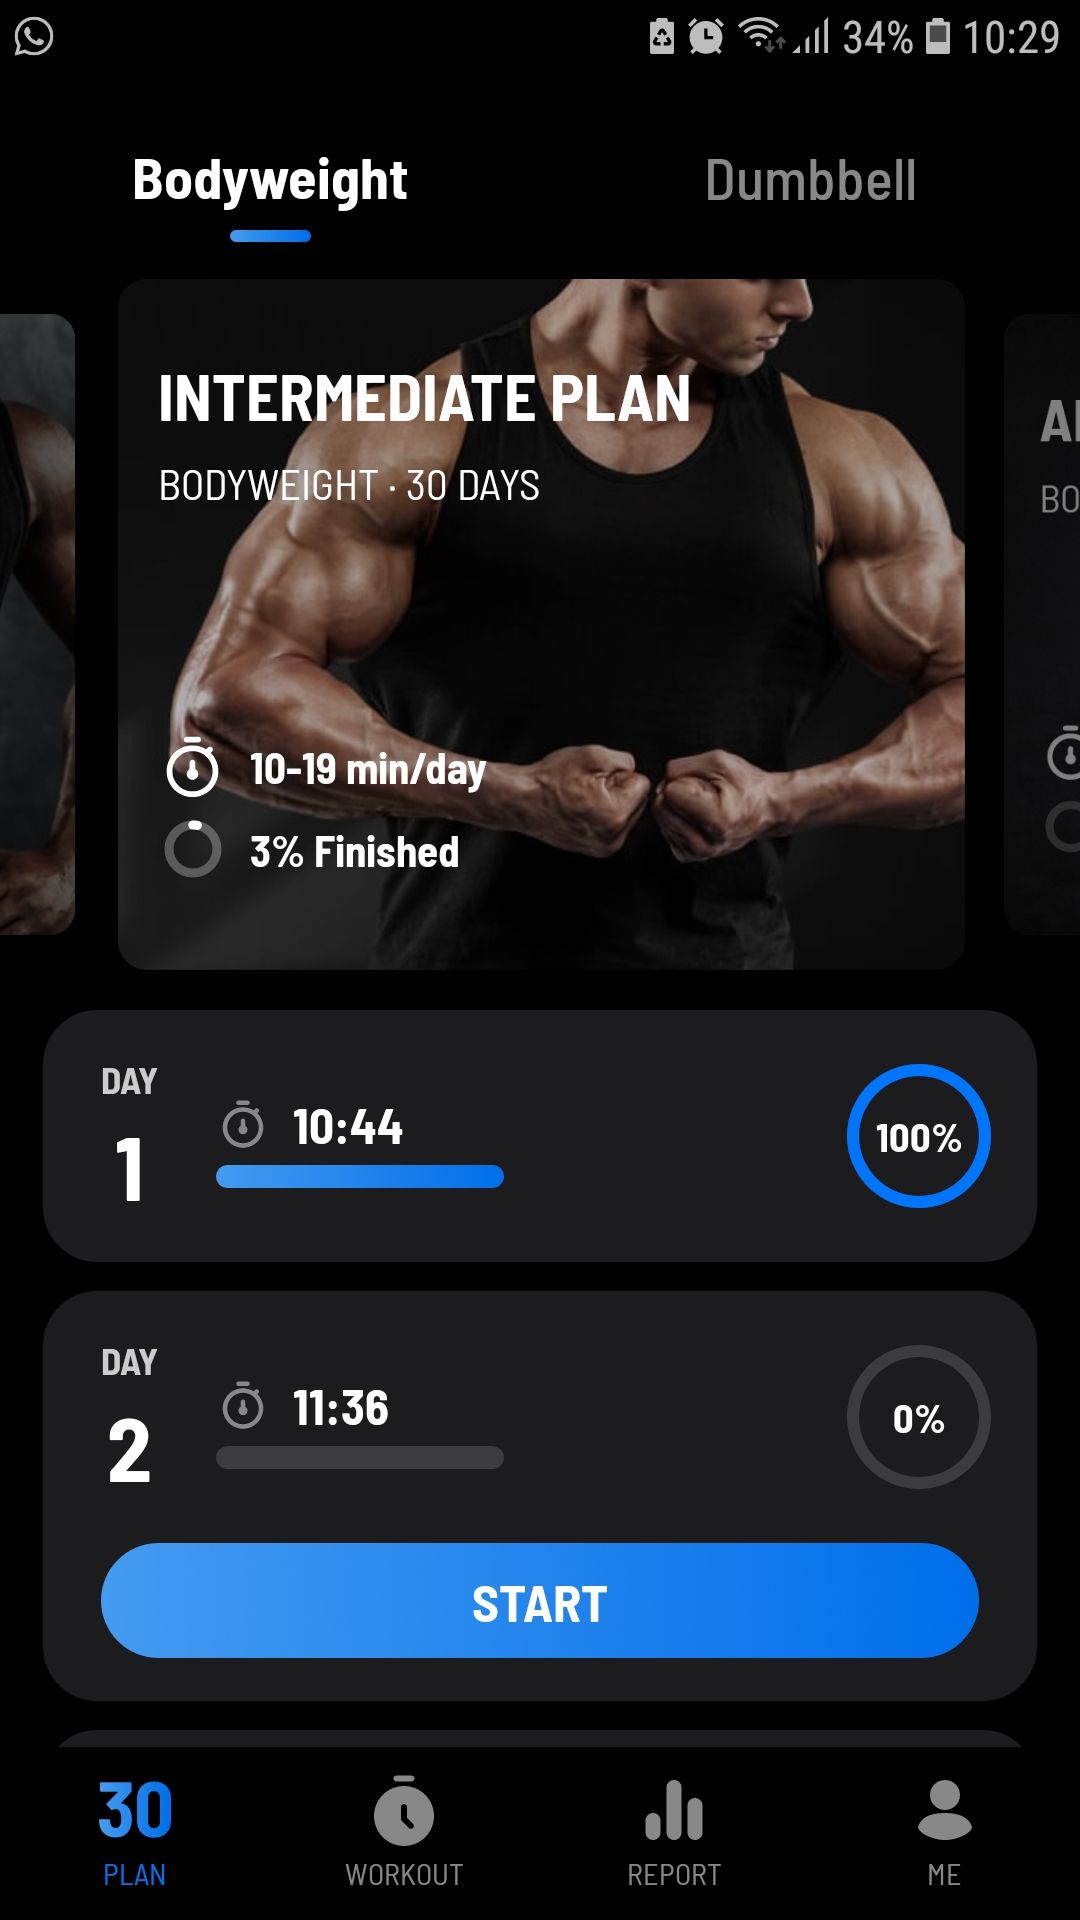 Arm Workout mobile fitness app bodyweight plan